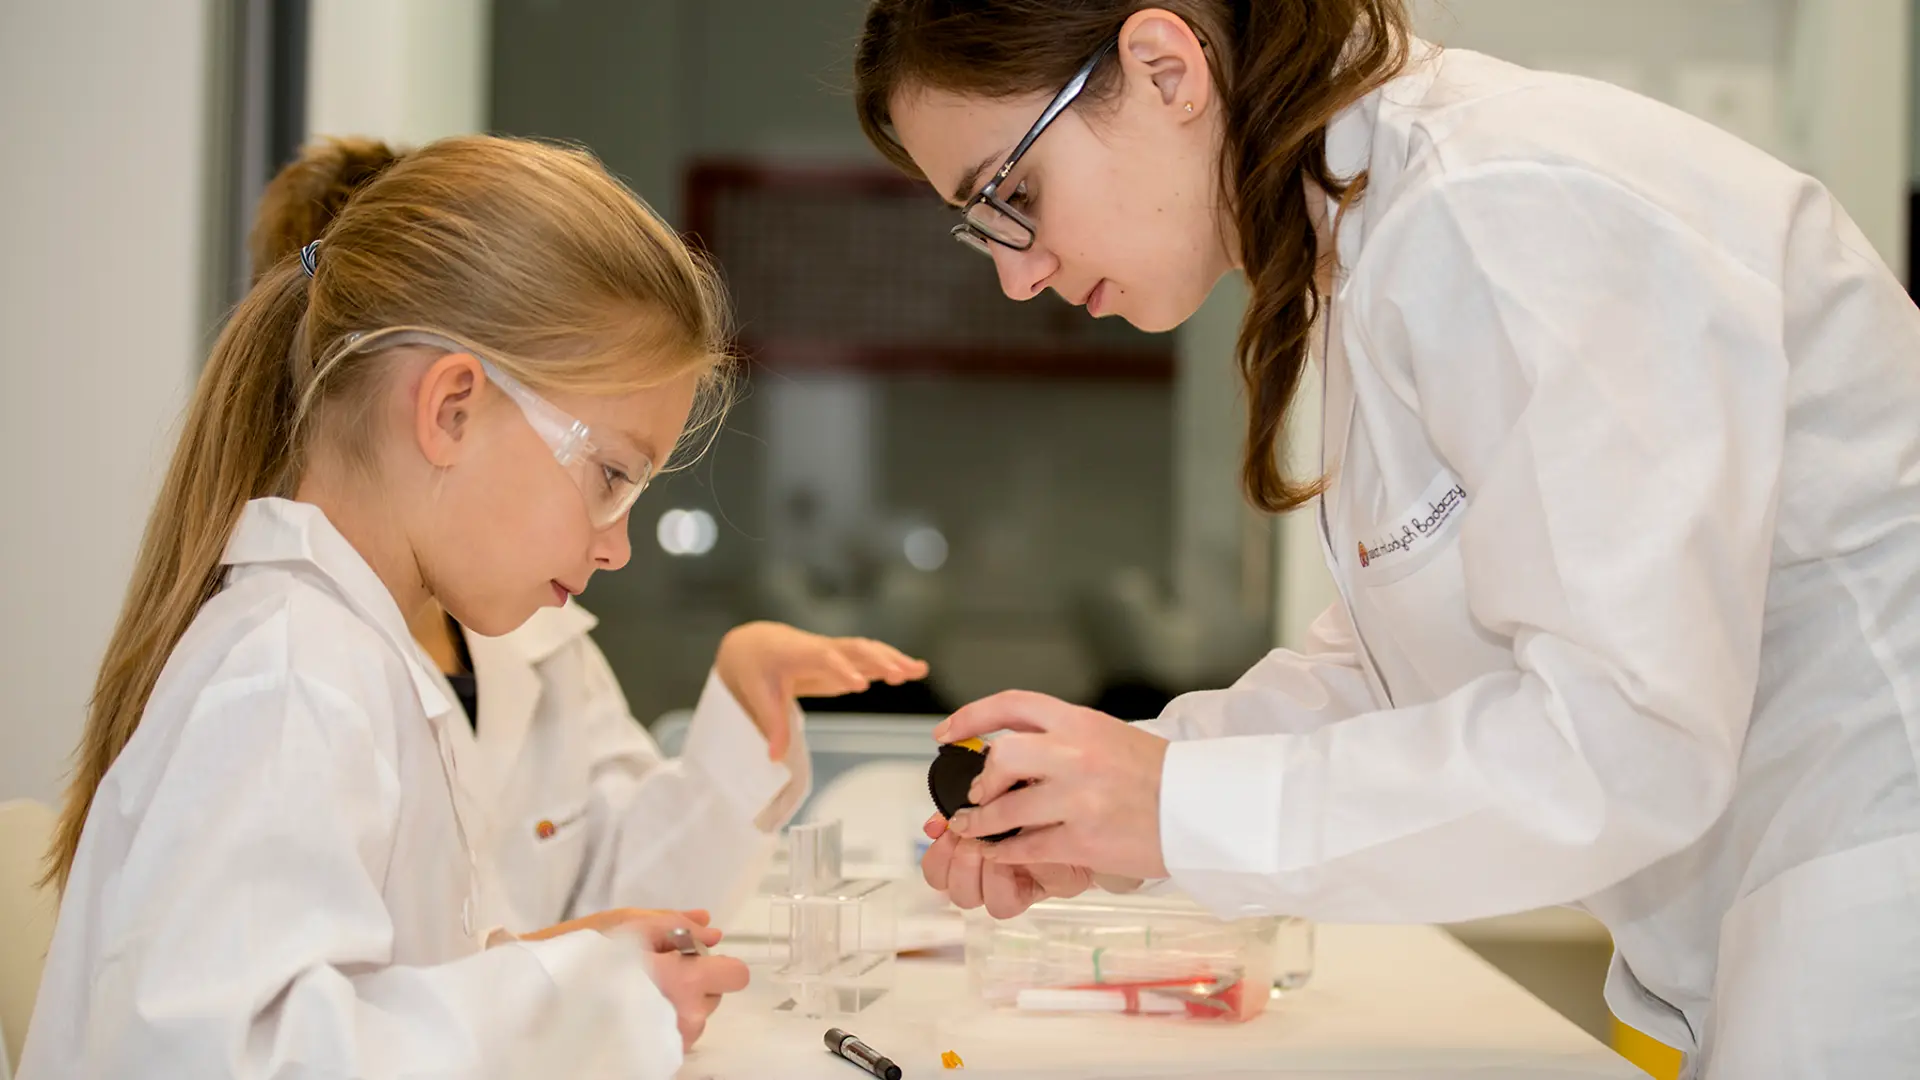 kid and female in lab coats